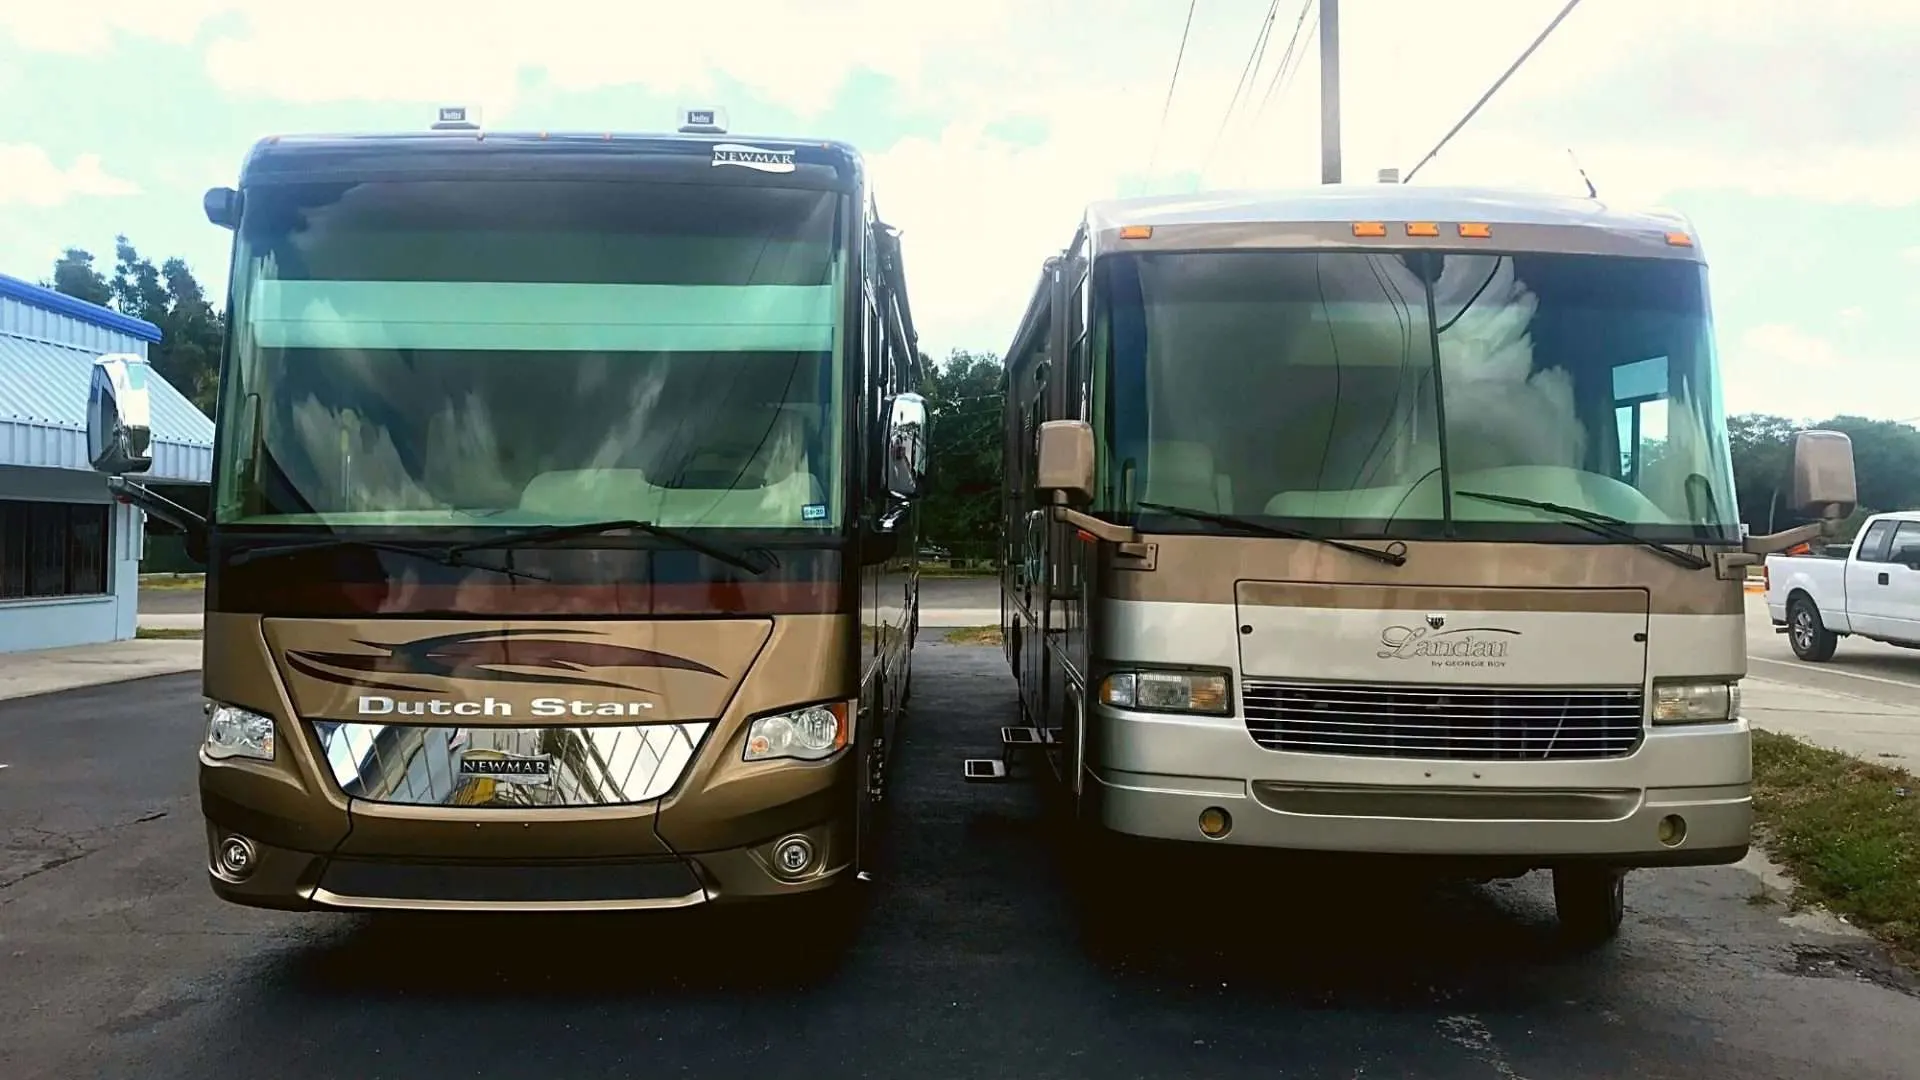 Diesel pusher and Class A gas motorhome side by side